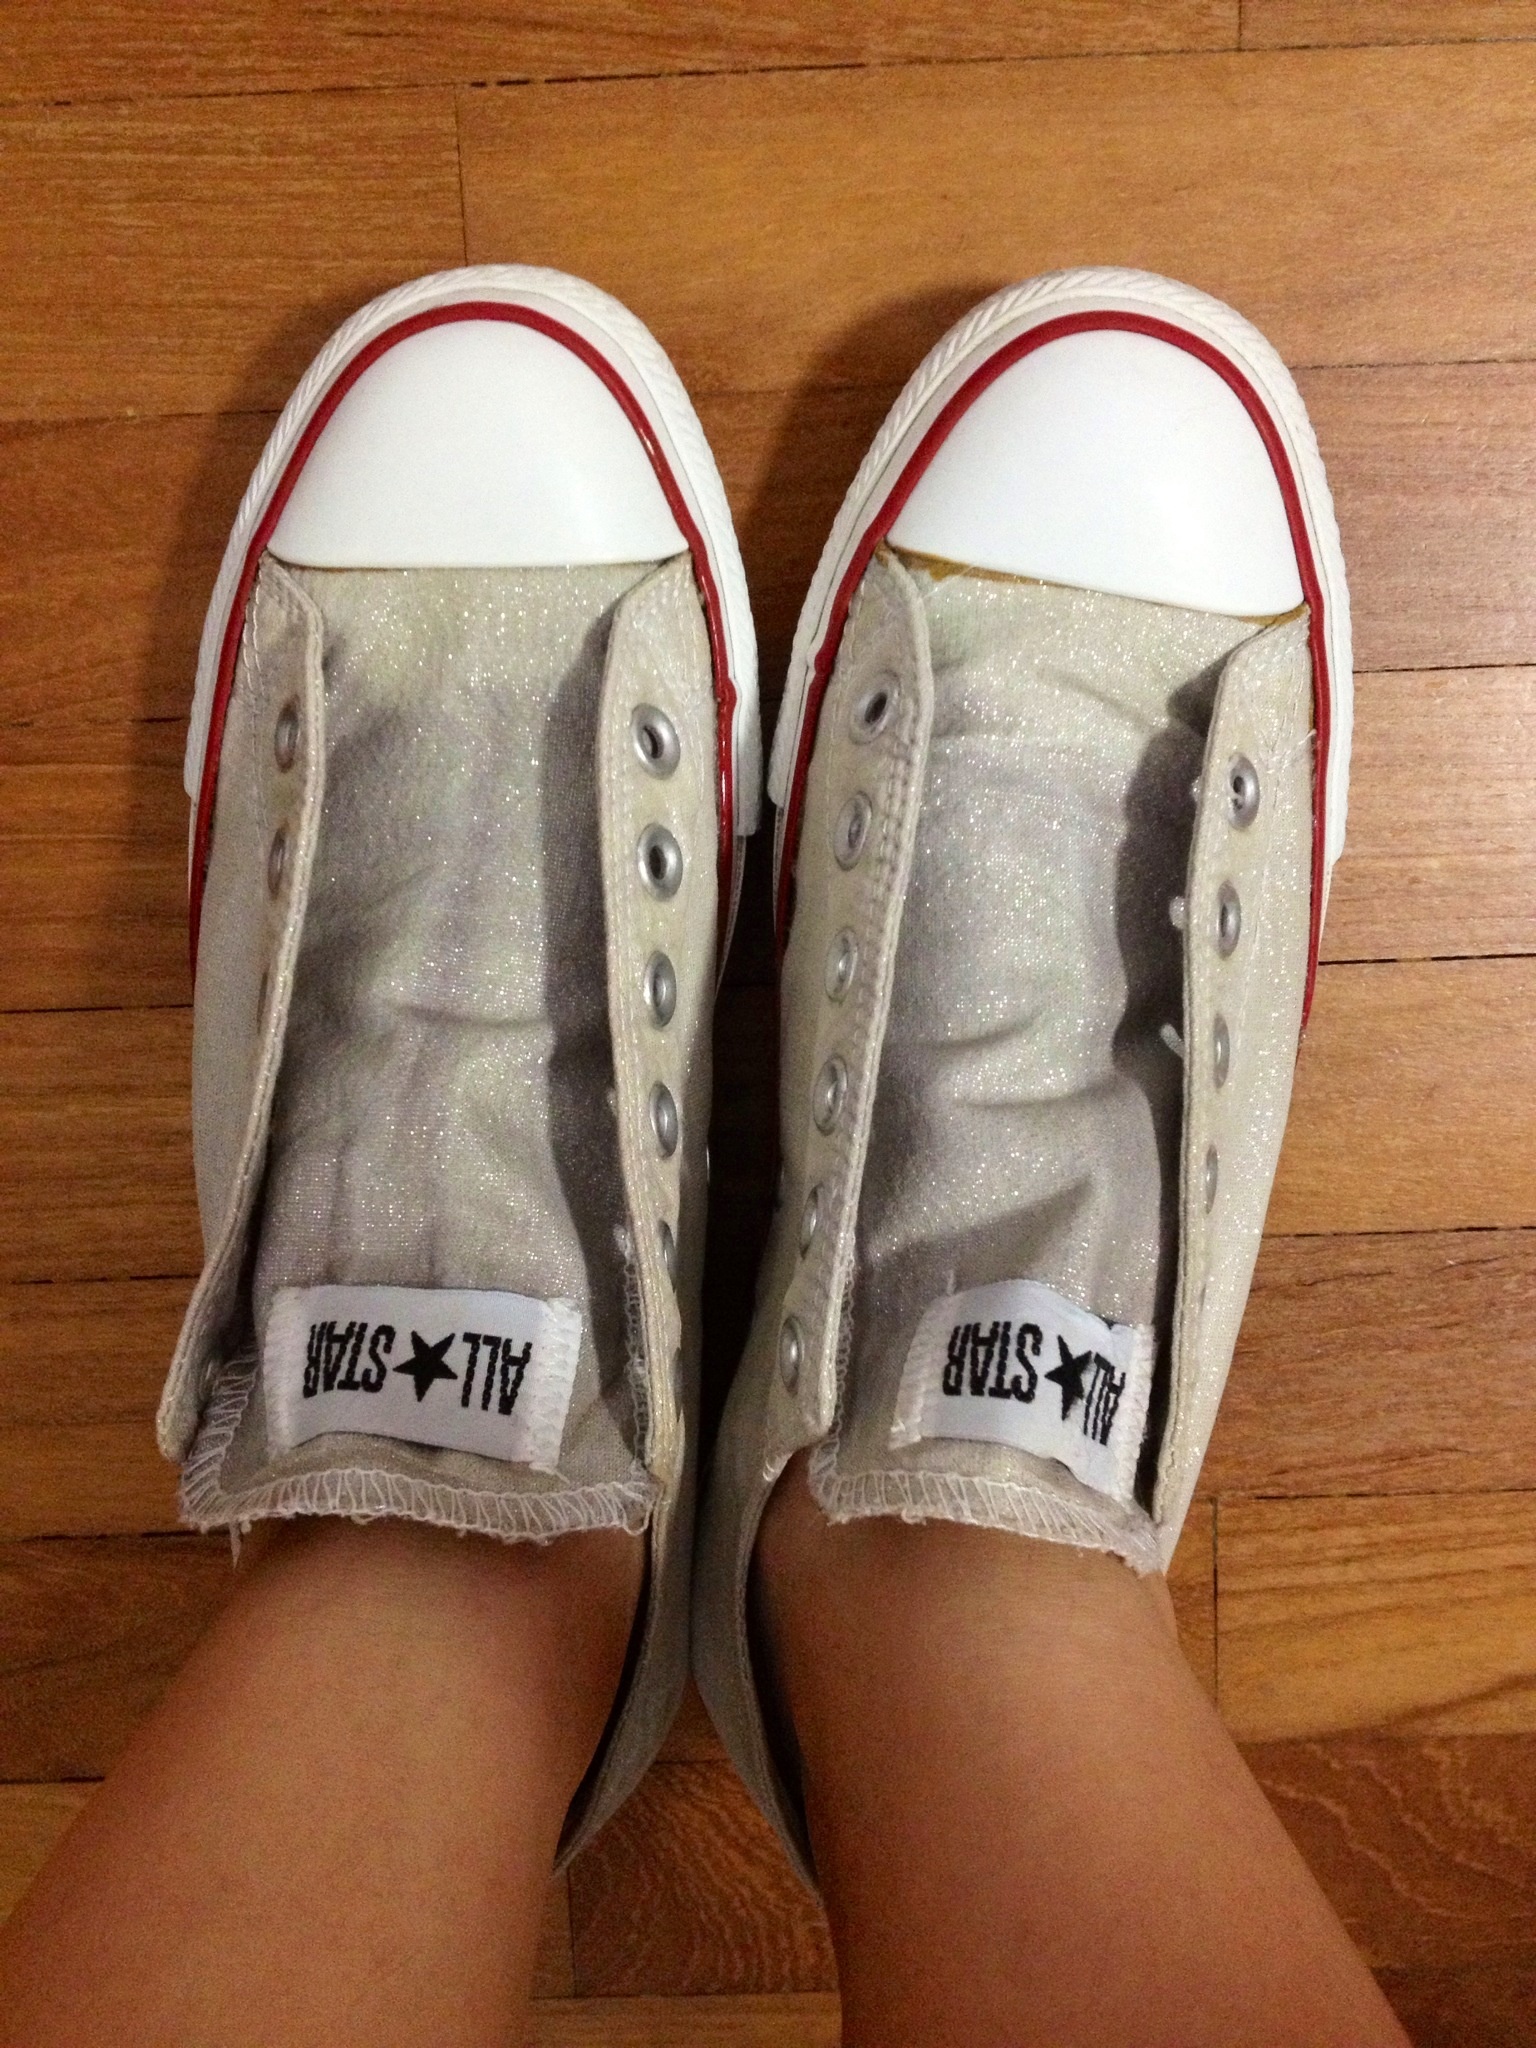 turn converse into slip ons